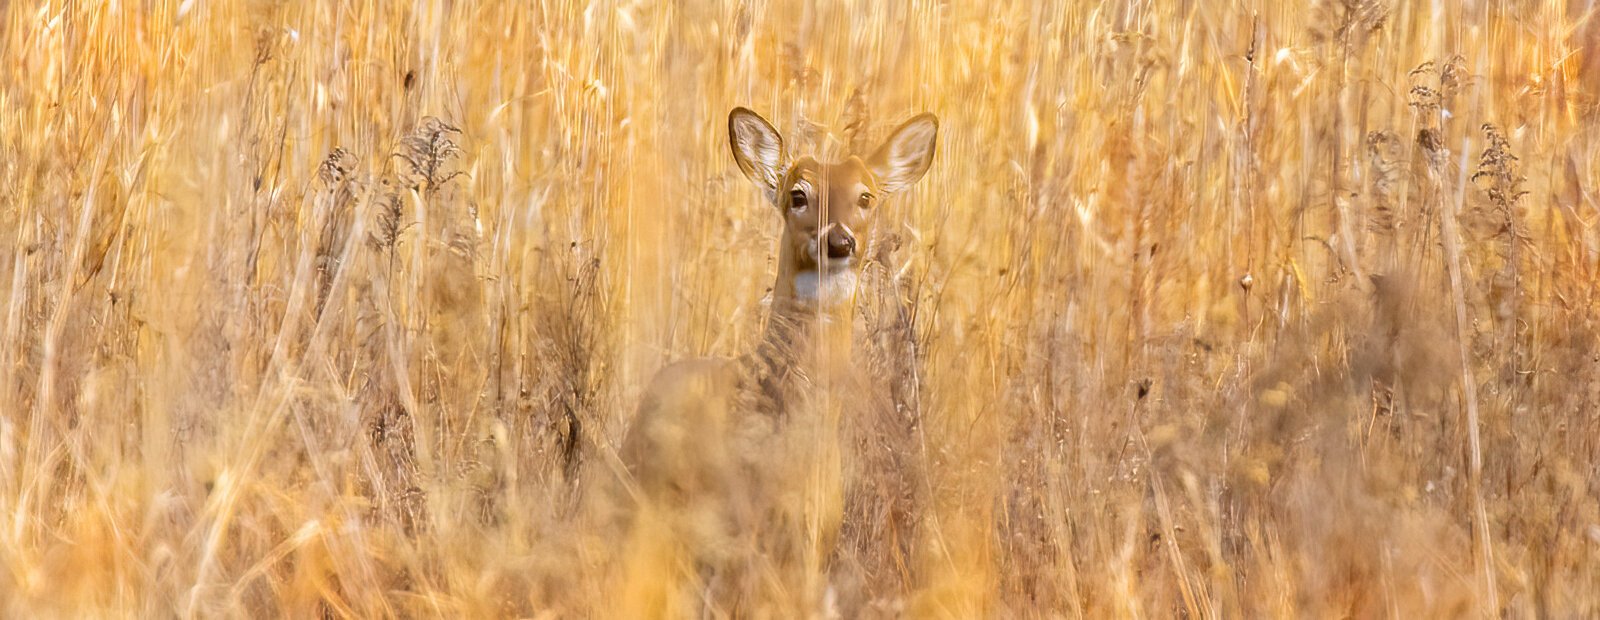 A deer pauses in the tall grass at the Joseph Steinen Wildlife Area.